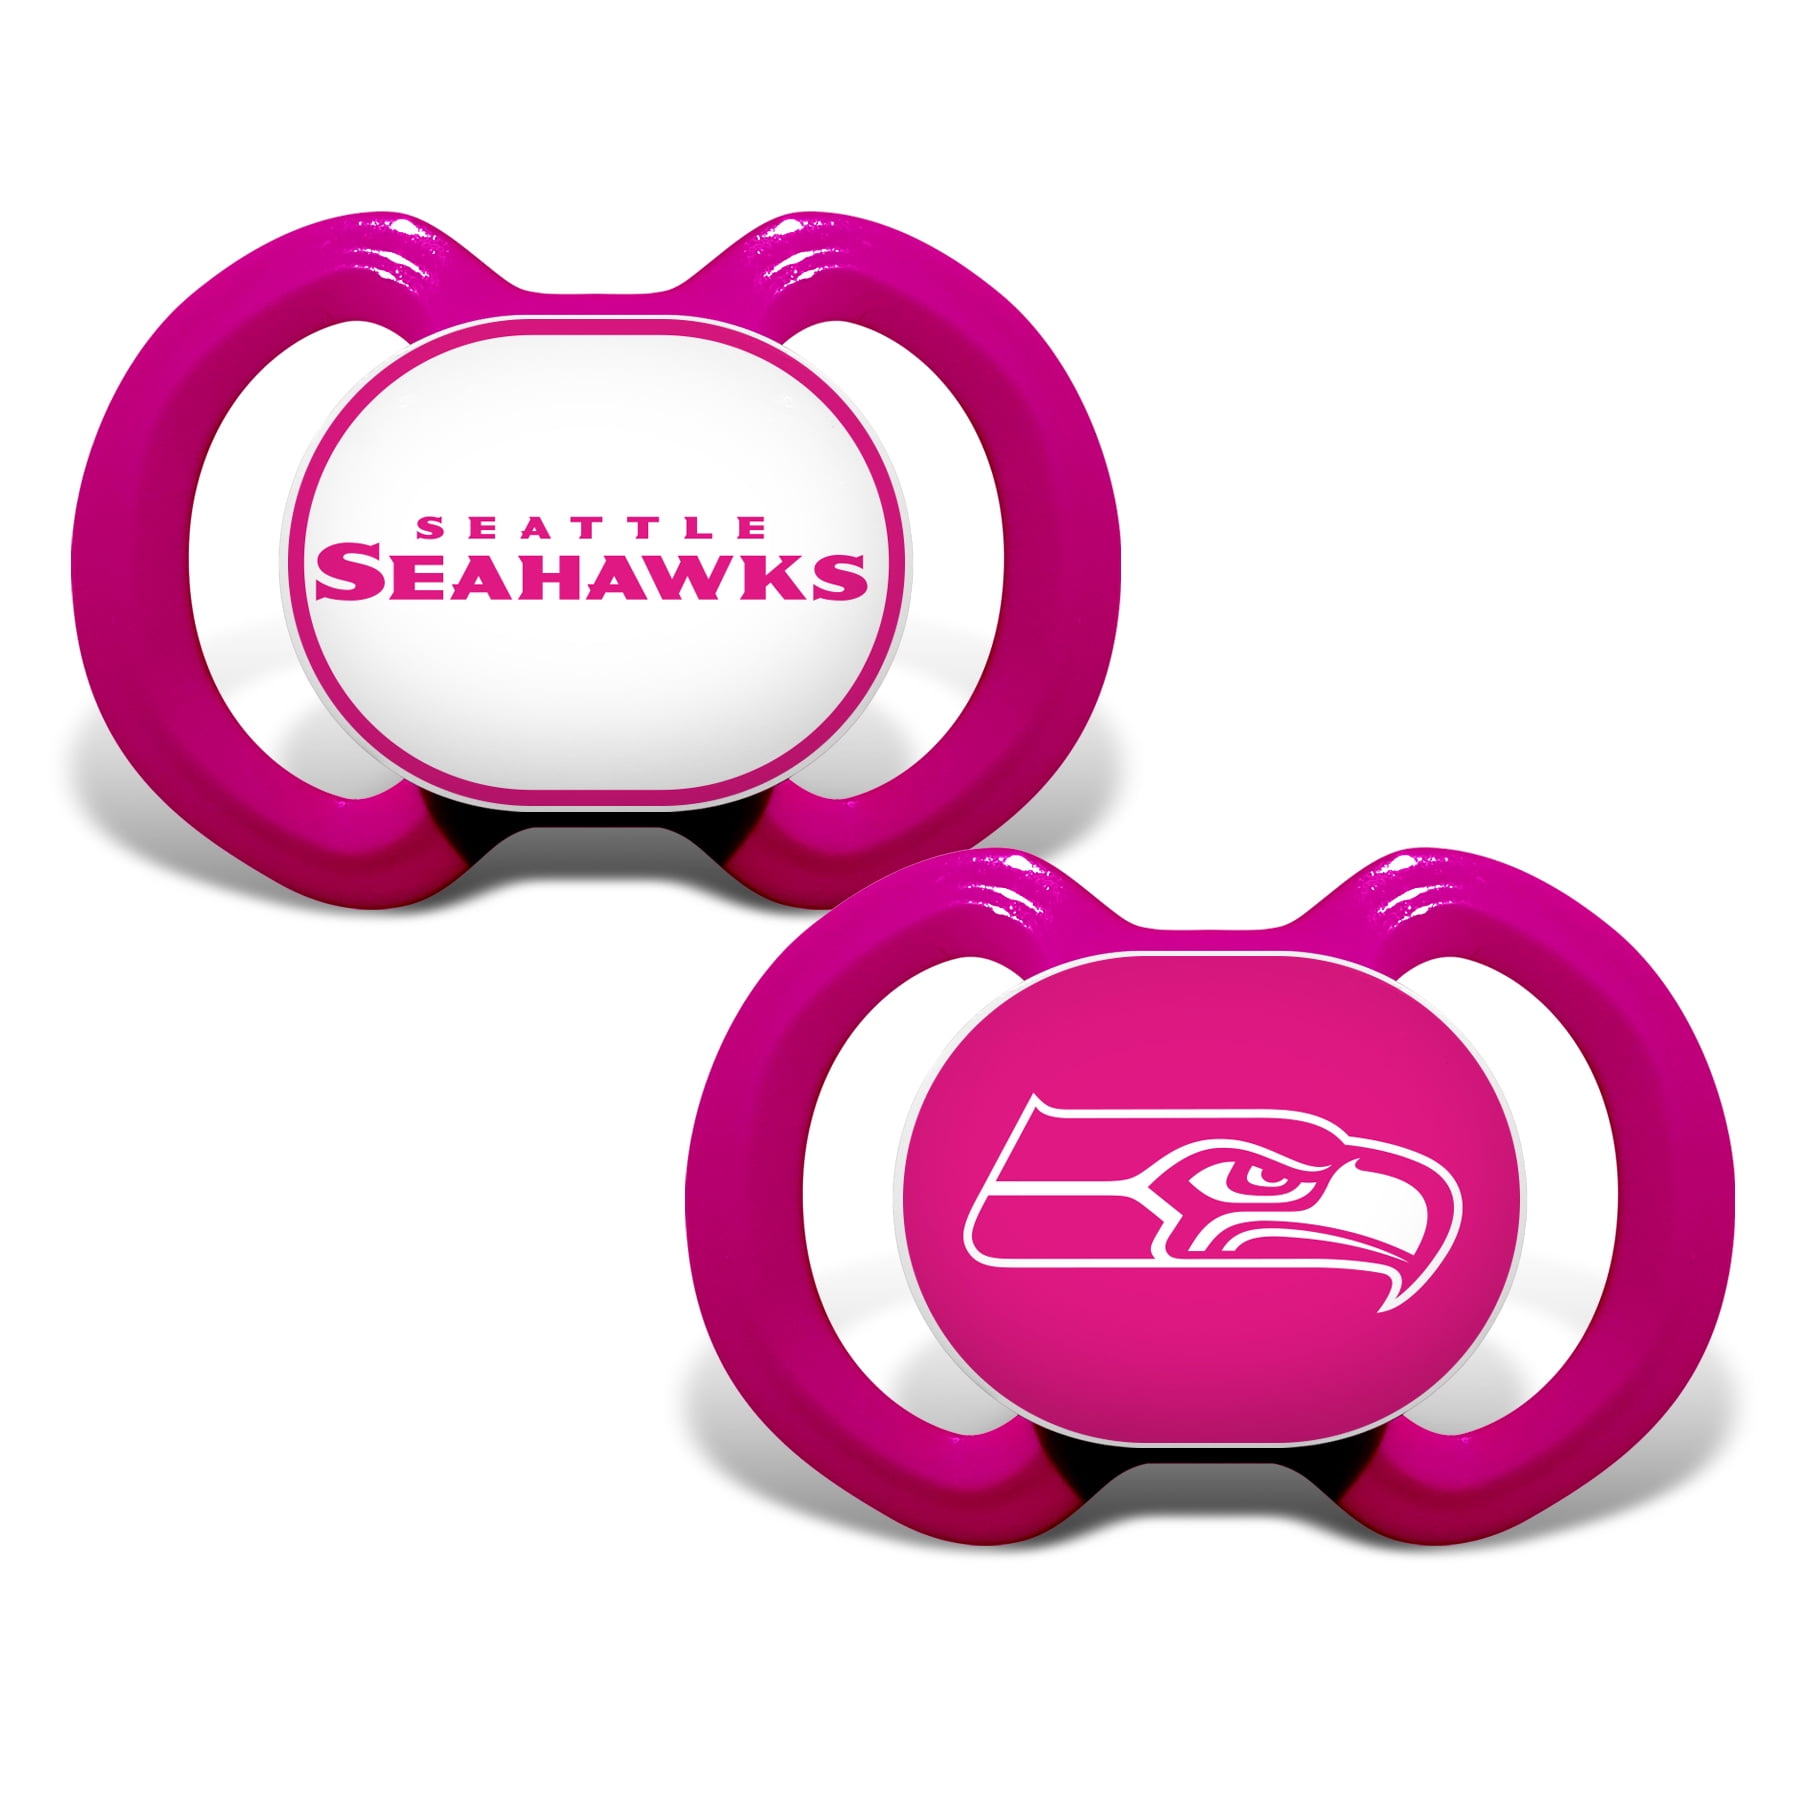 Seattle Seahawks Baby Infant Pacifiers NEW 2 Pack GREAT SHOWER GIFT 